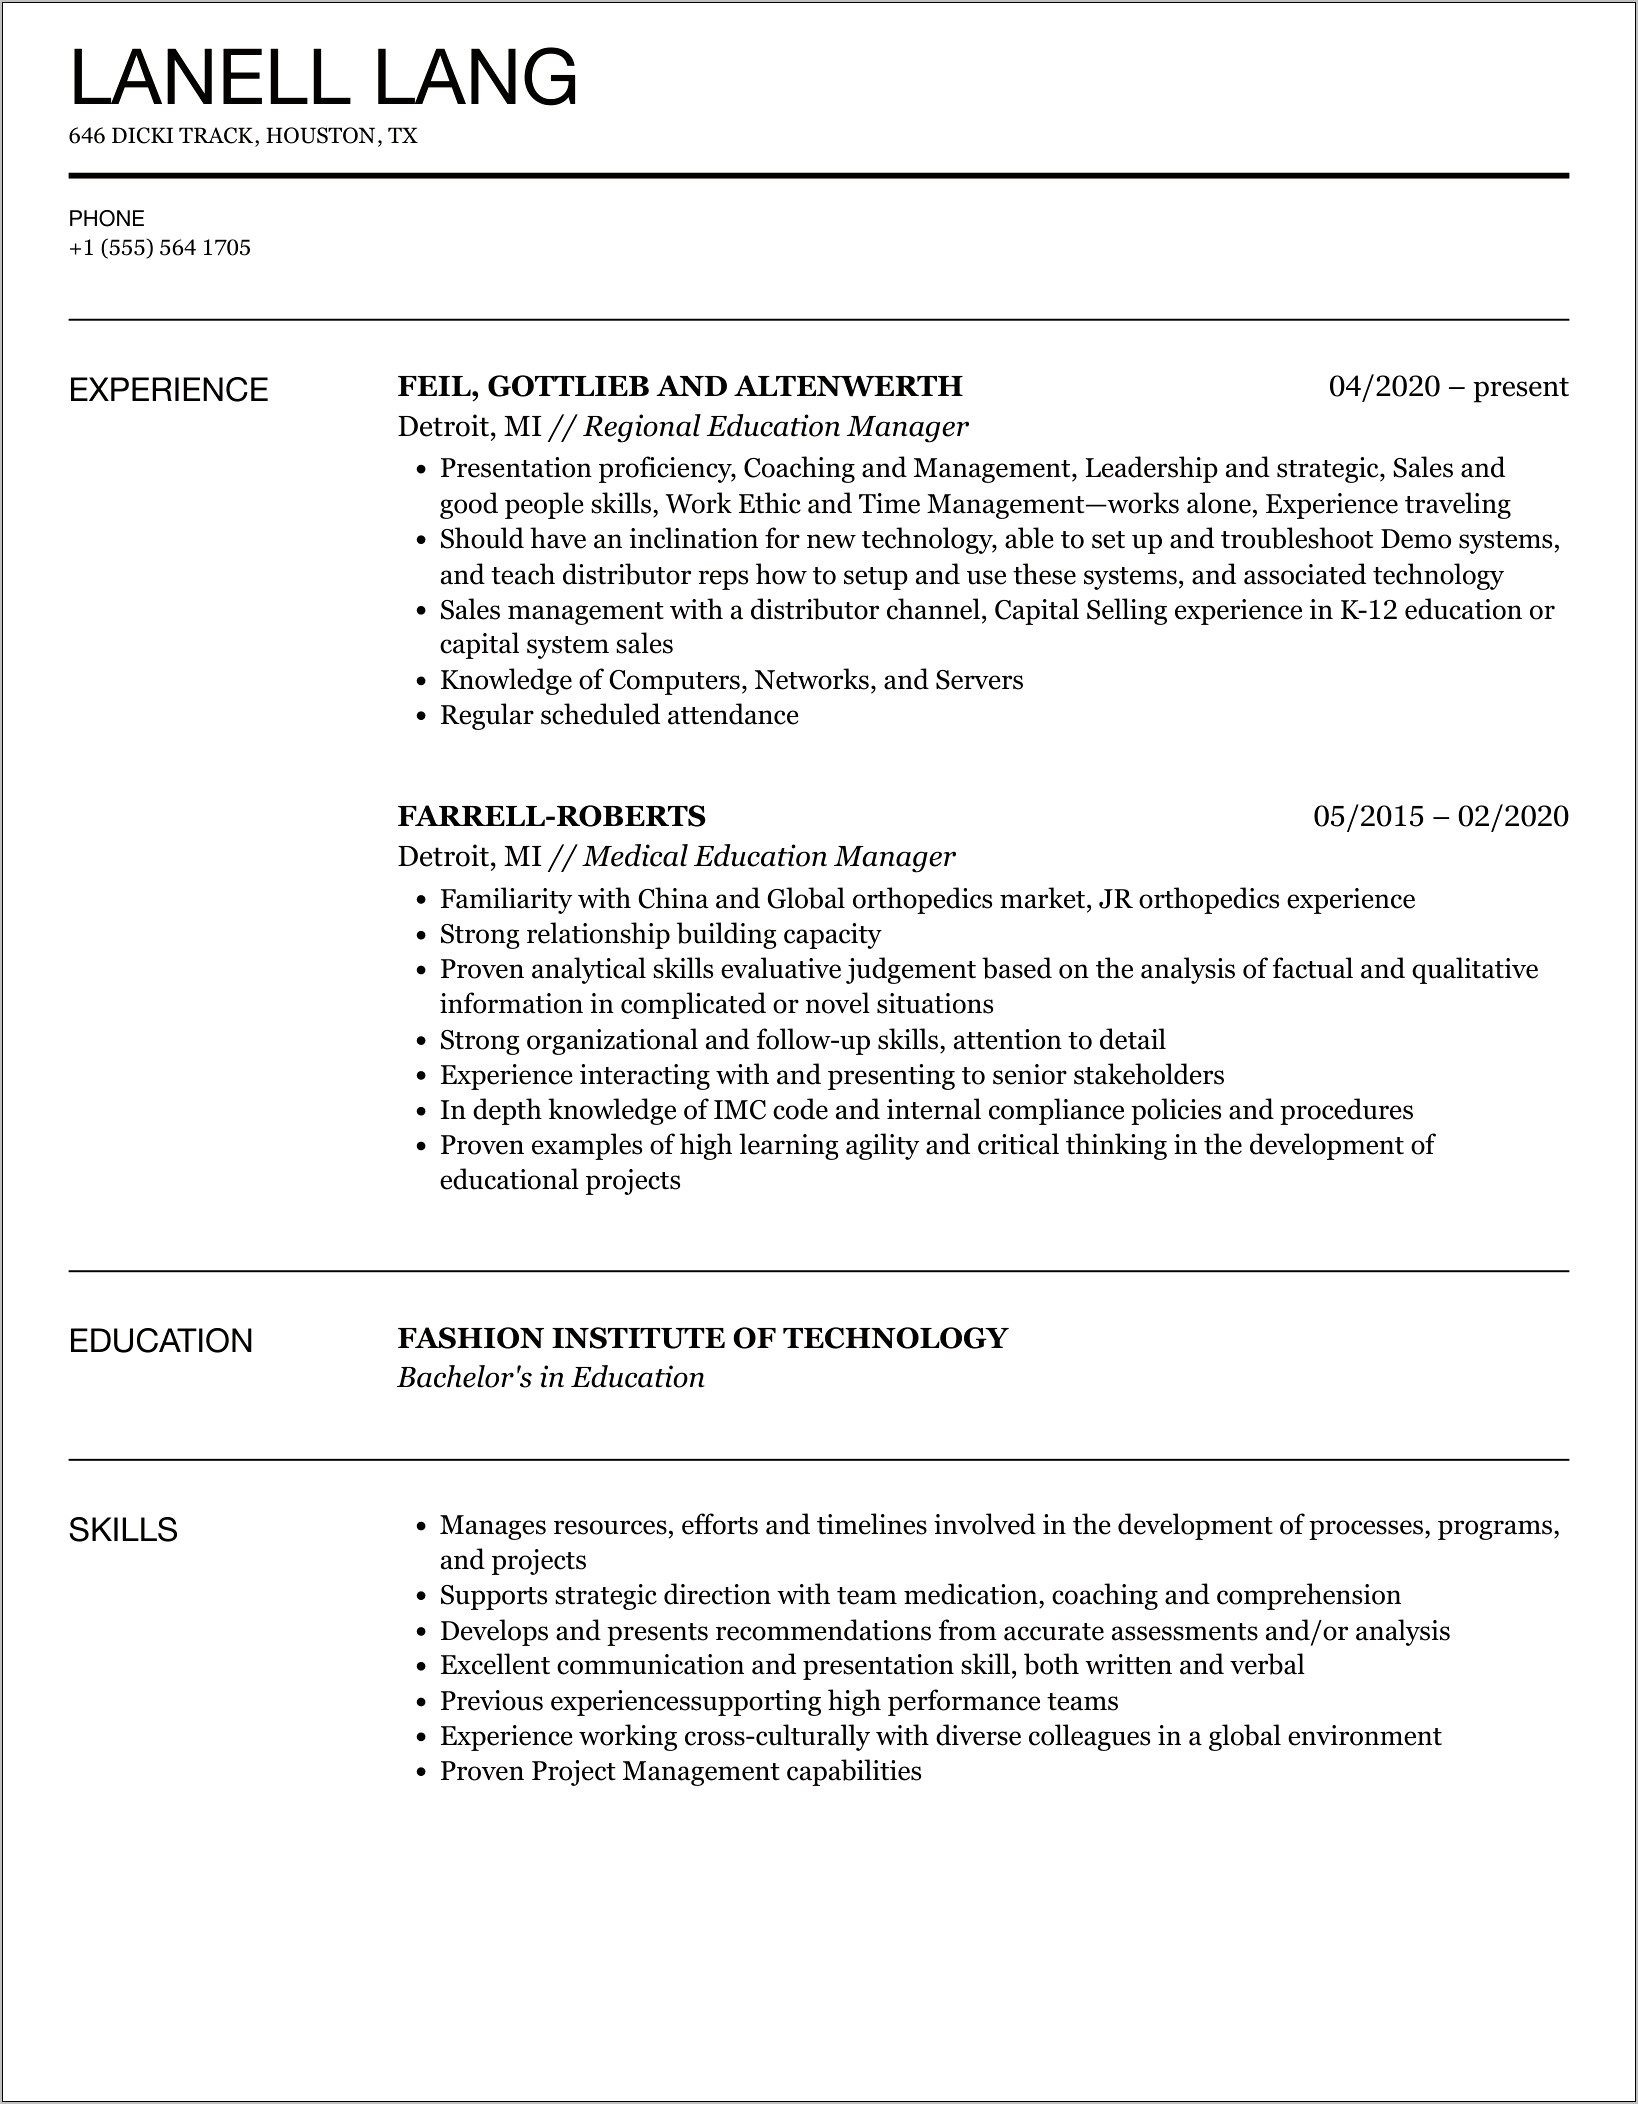 Resume For School Manager Position